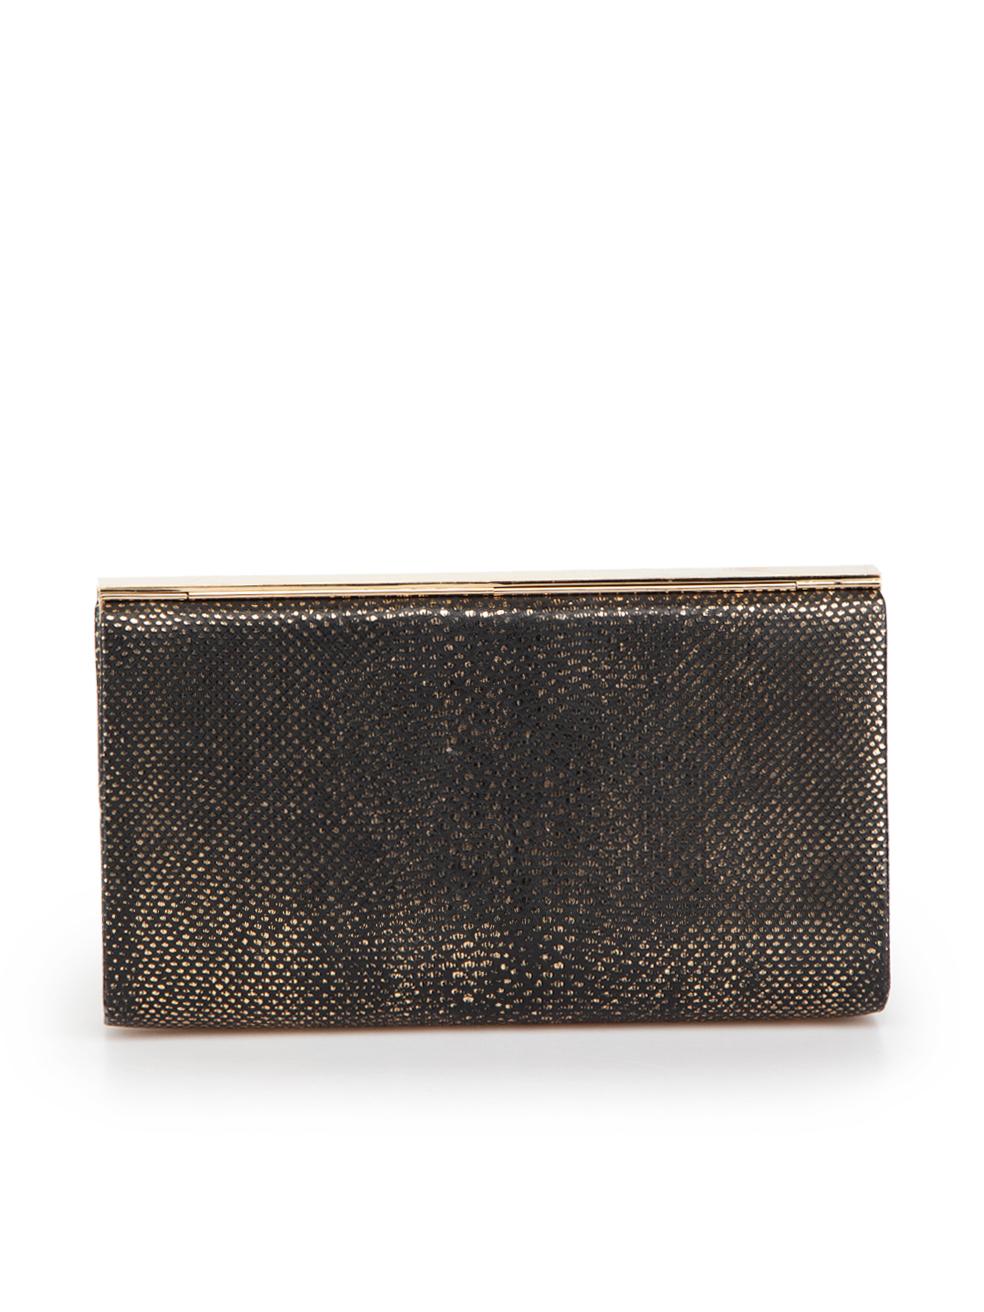 Jimmy Choo Metallic Leather Embossed Clutch Bag In Good Condition For Sale In London, GB